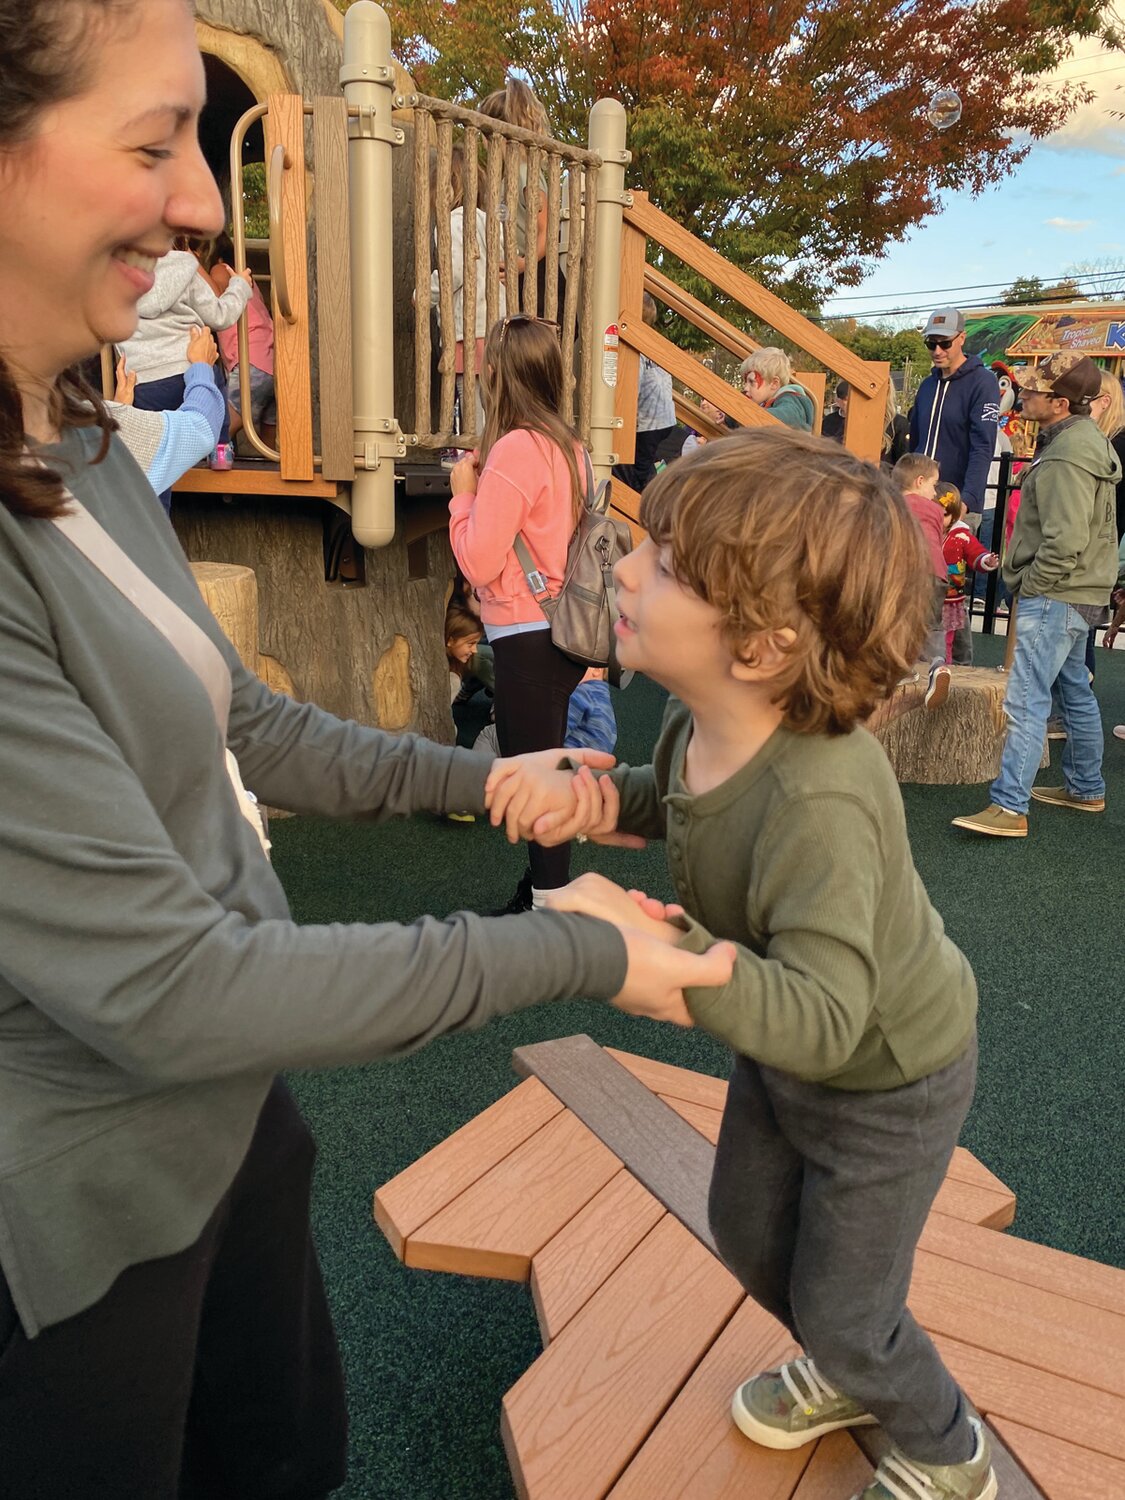 Dozens and dozens of happy children flooded Doylestown Borough’s newest playground at Broad Commons Park Monday, as the long-awaited, Fonthill-inspired play area opened its gates.